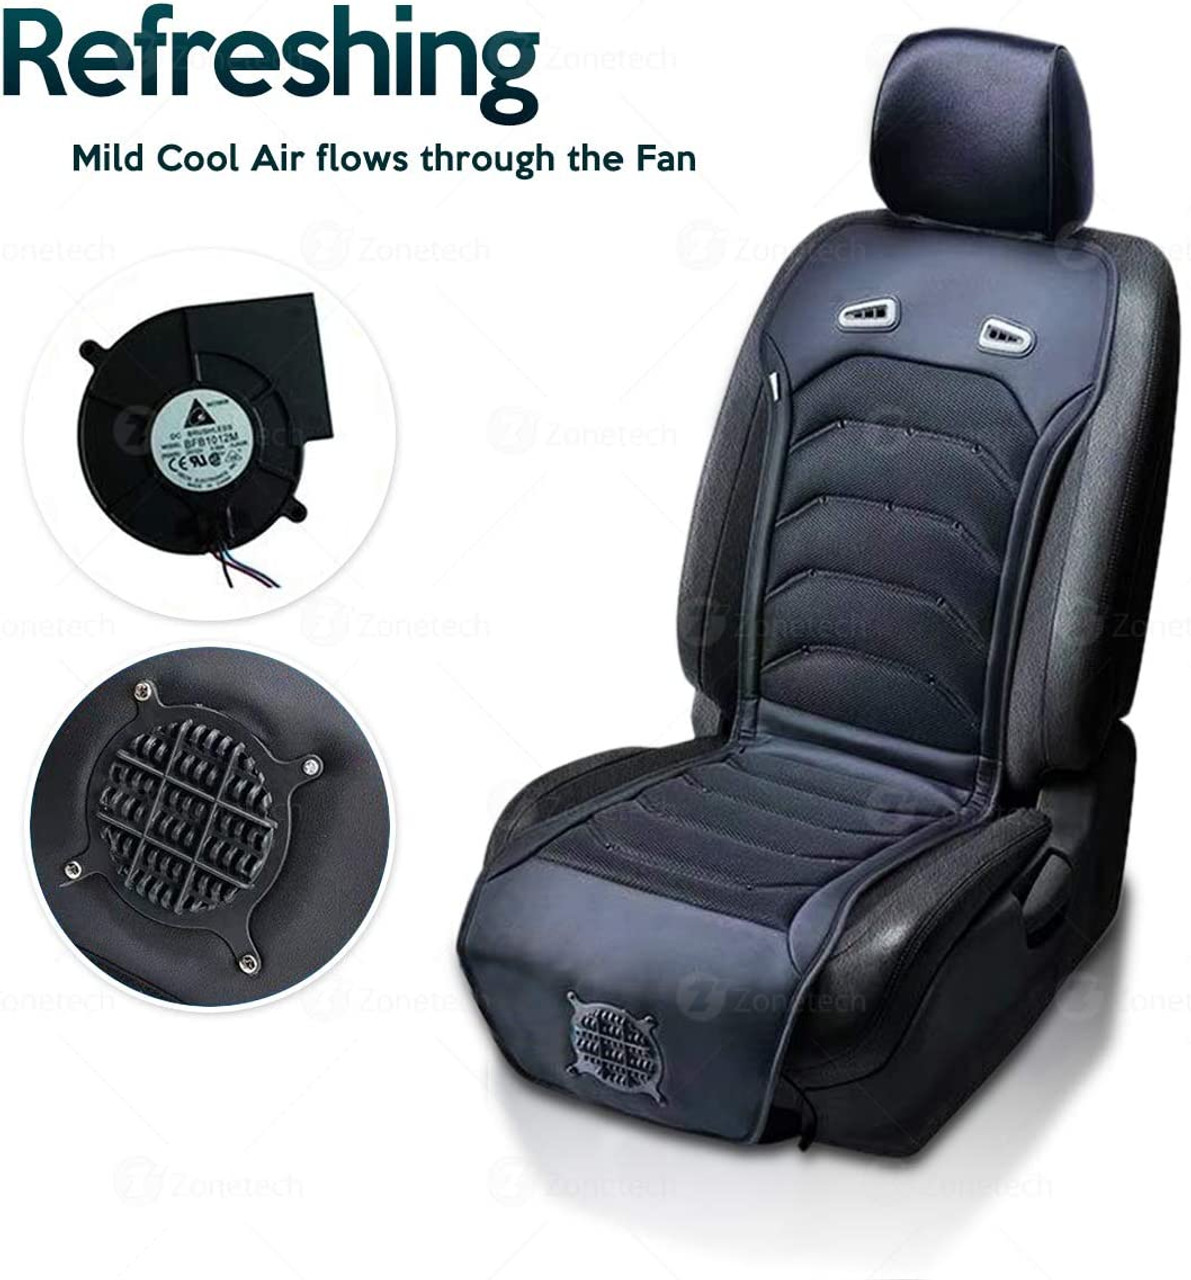 Zone Tech Black Wooden Beaded Comfort Seat Cover - 2 Pack Car